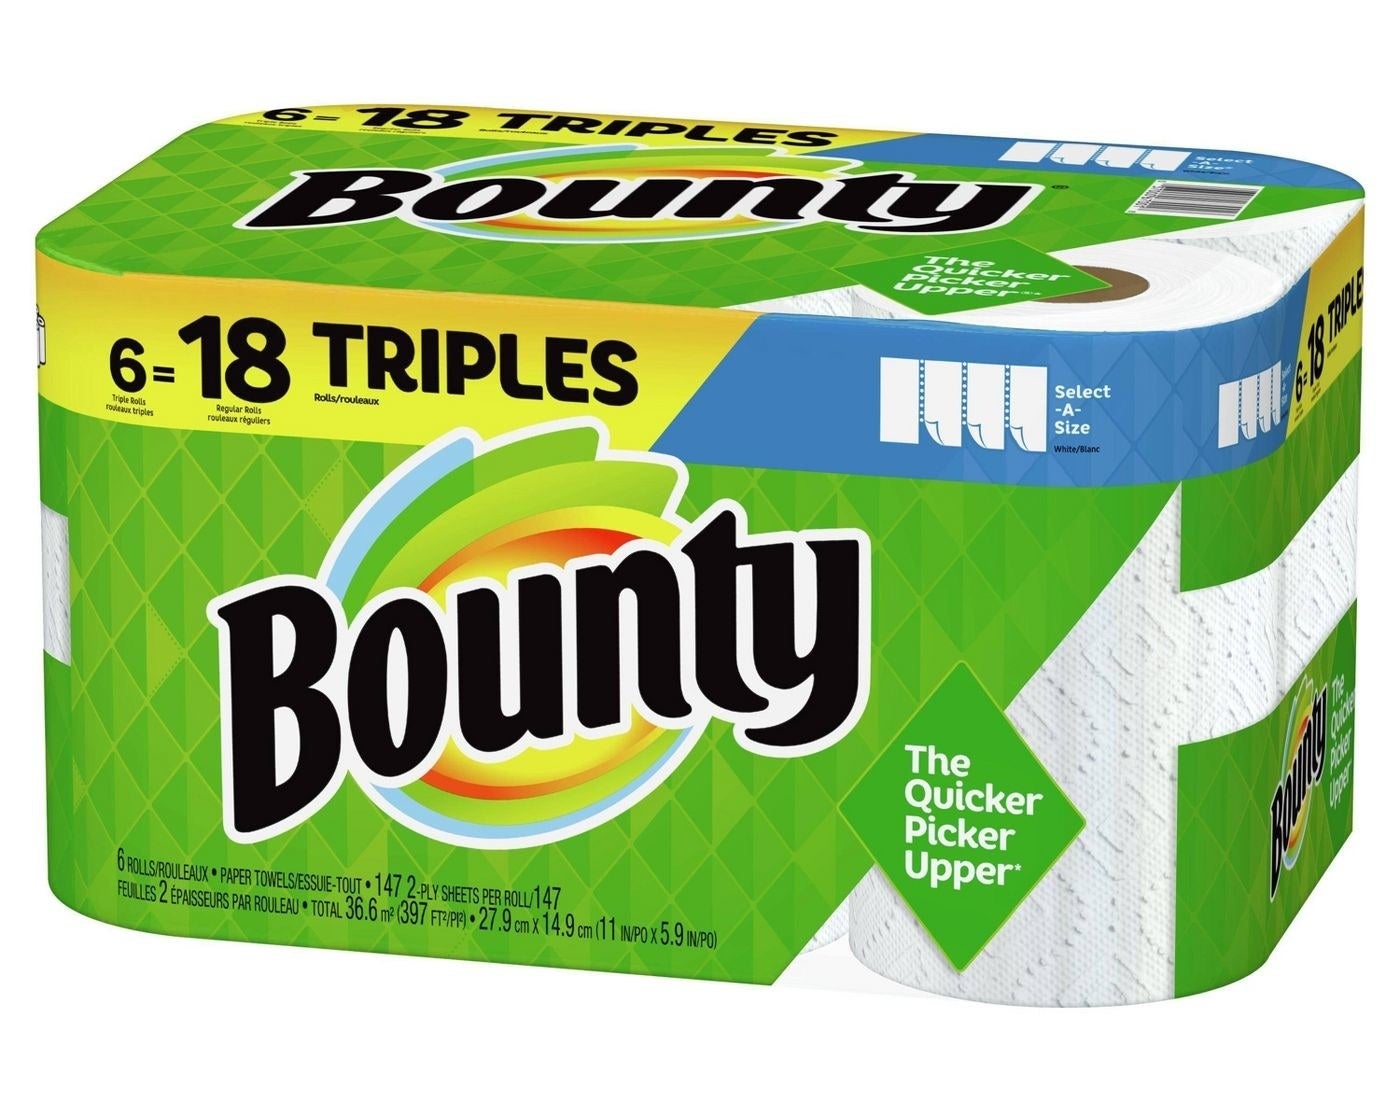 the pack of Bounty